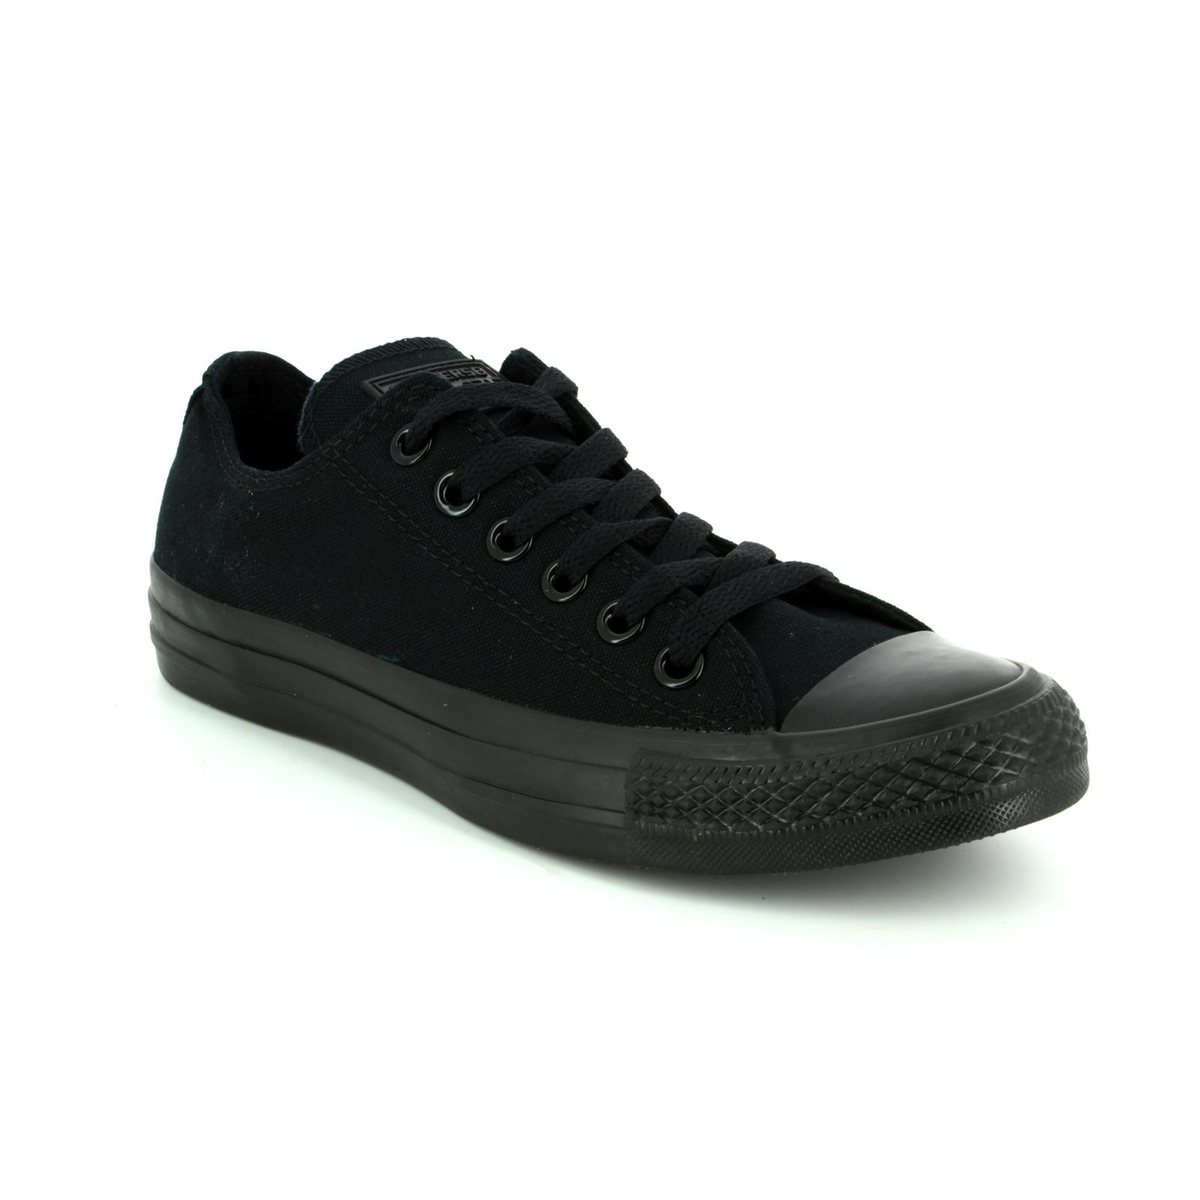 converse all star ox trainers black